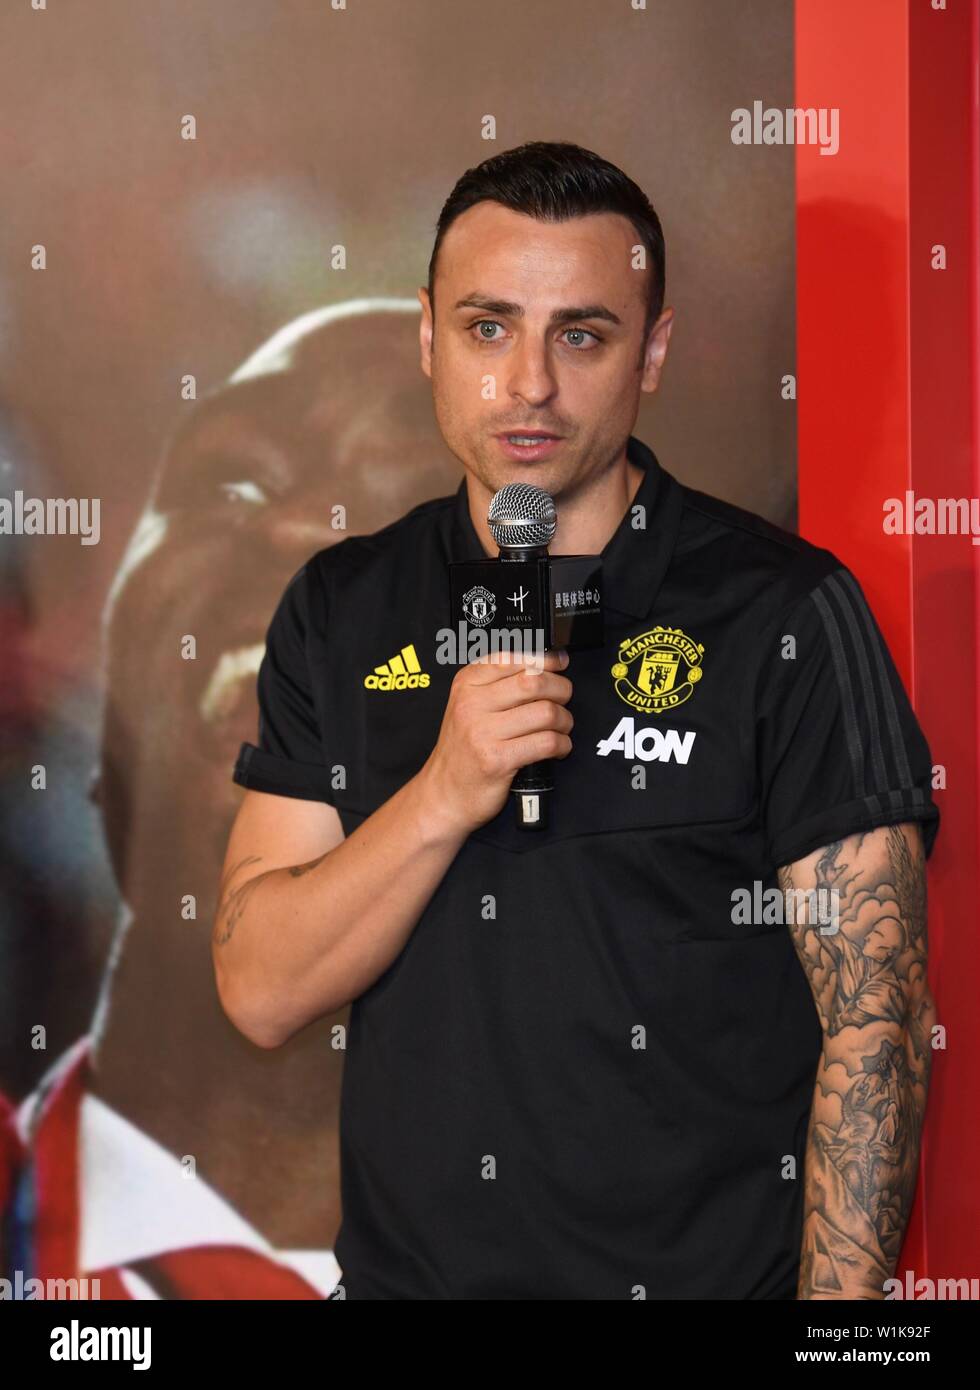 Bulgarian football player Dimitar Berbatov attends a promotional event at the first club-themed entertainment and experience center launched by Manchester United in Beijing, China, 3 July 2019. Stock Photo